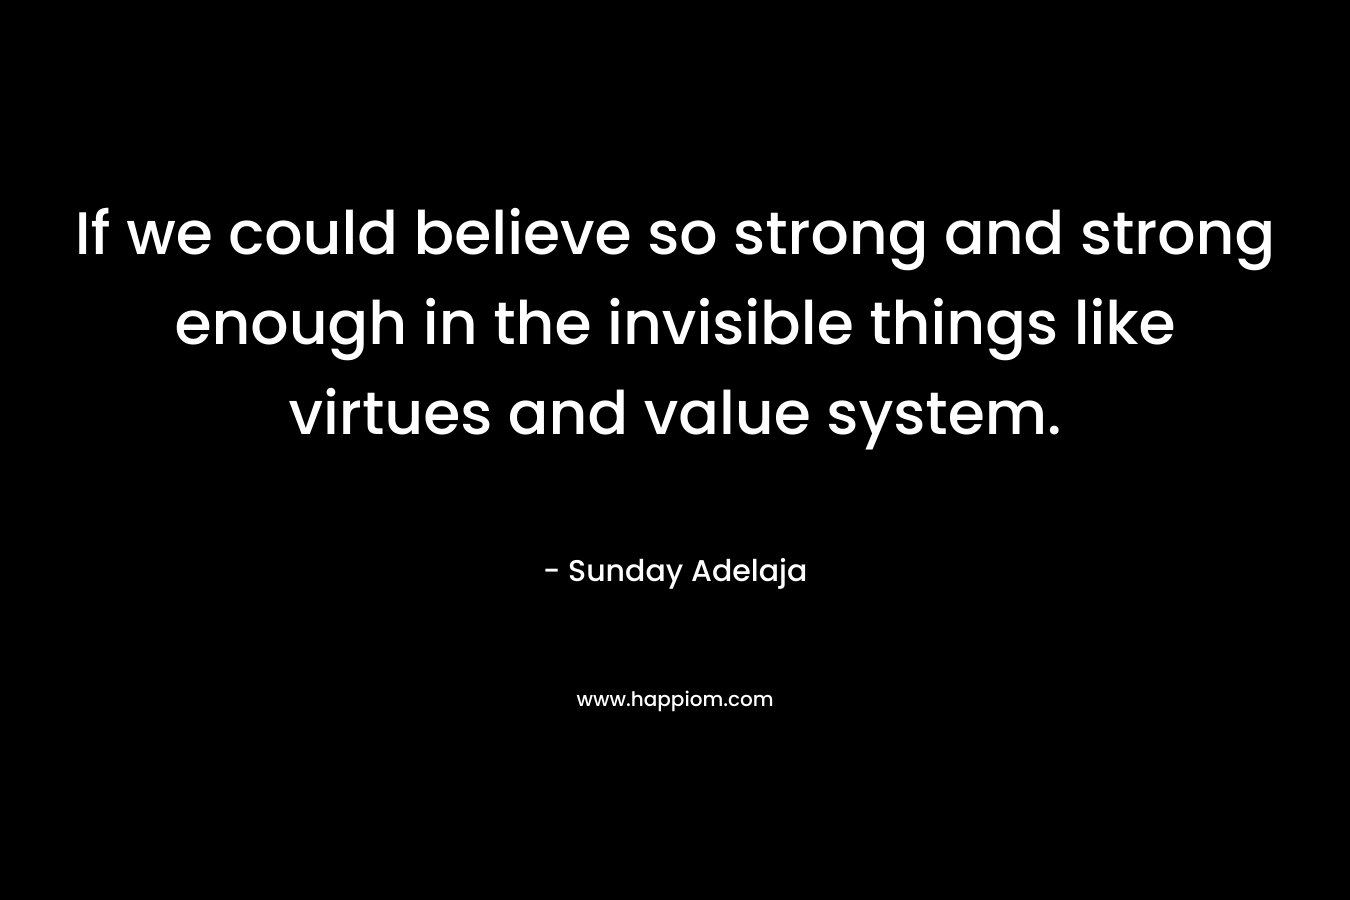 If we could believe so strong and strong enough in the invisible things like virtues and value system.